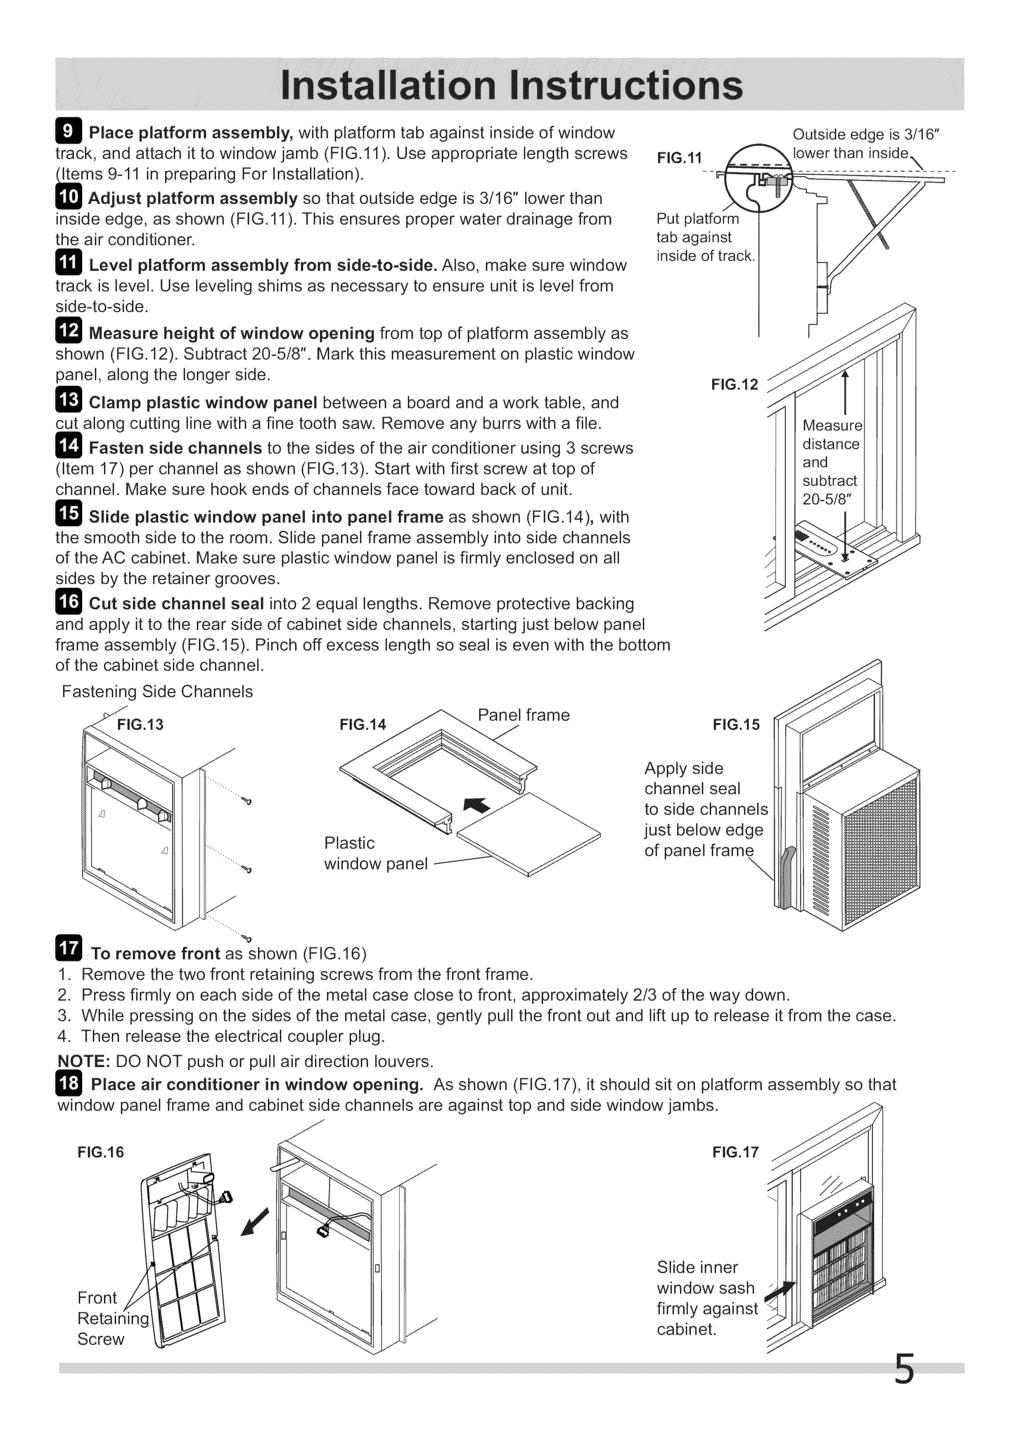 I_ Place platform assembly, with platform tab against inside of window track, and attach it to window jamb (FIG.11). Use appropriate length screws mas 9-11 in preparing For Installation).